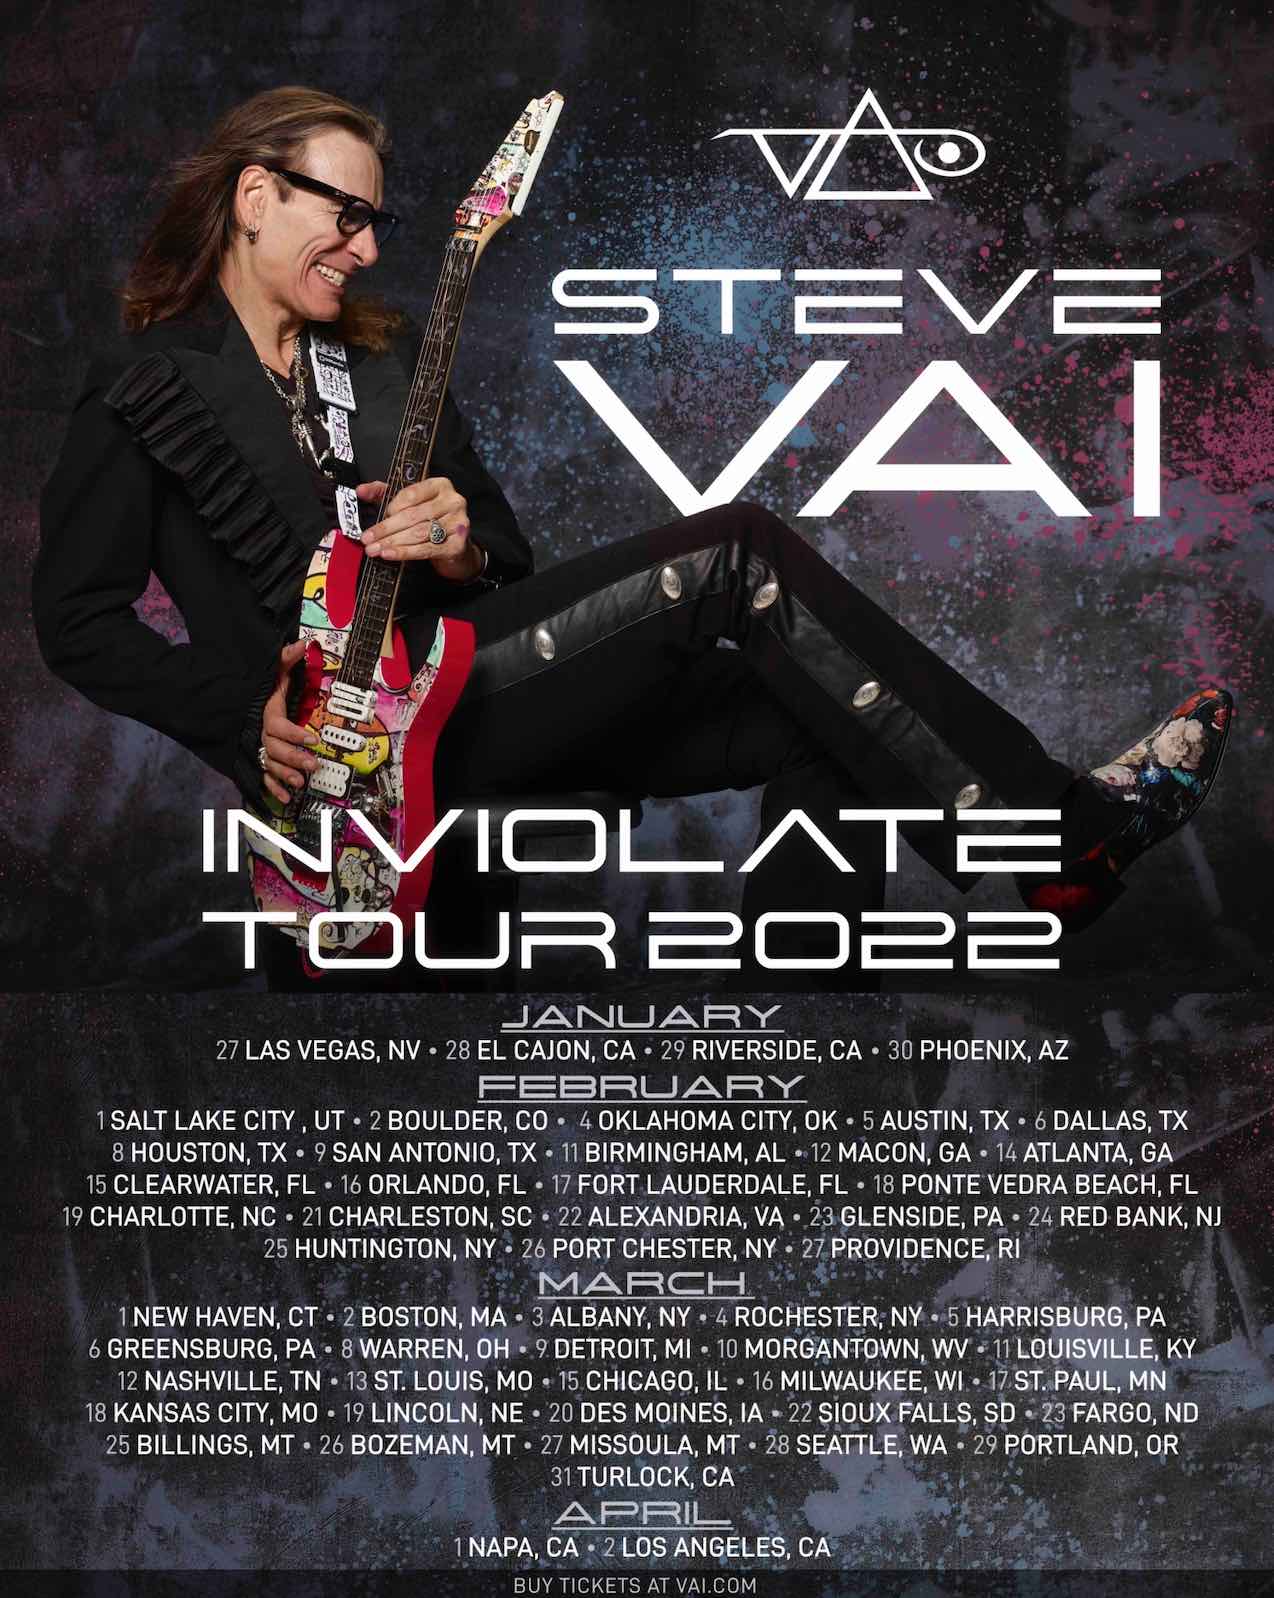 Steve Vai Announces 2022 Tour with Multiple stops in New York